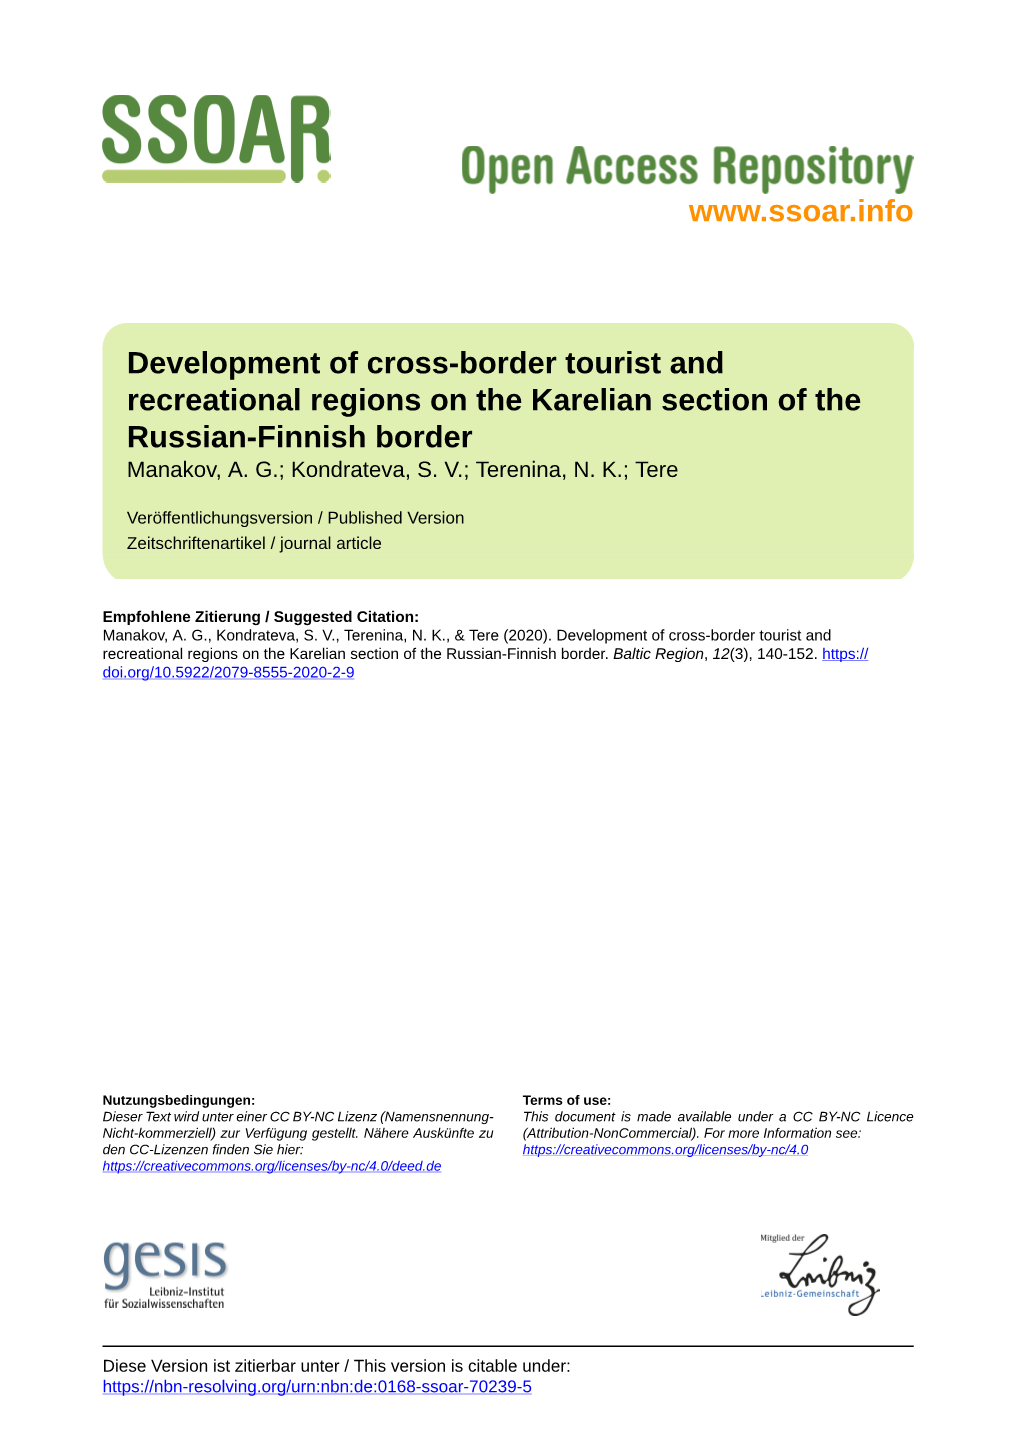 Development of Cross-Border Tourist and Recreational Regions on the Karelian Section of the Russian-Finnish Border Manakov, A